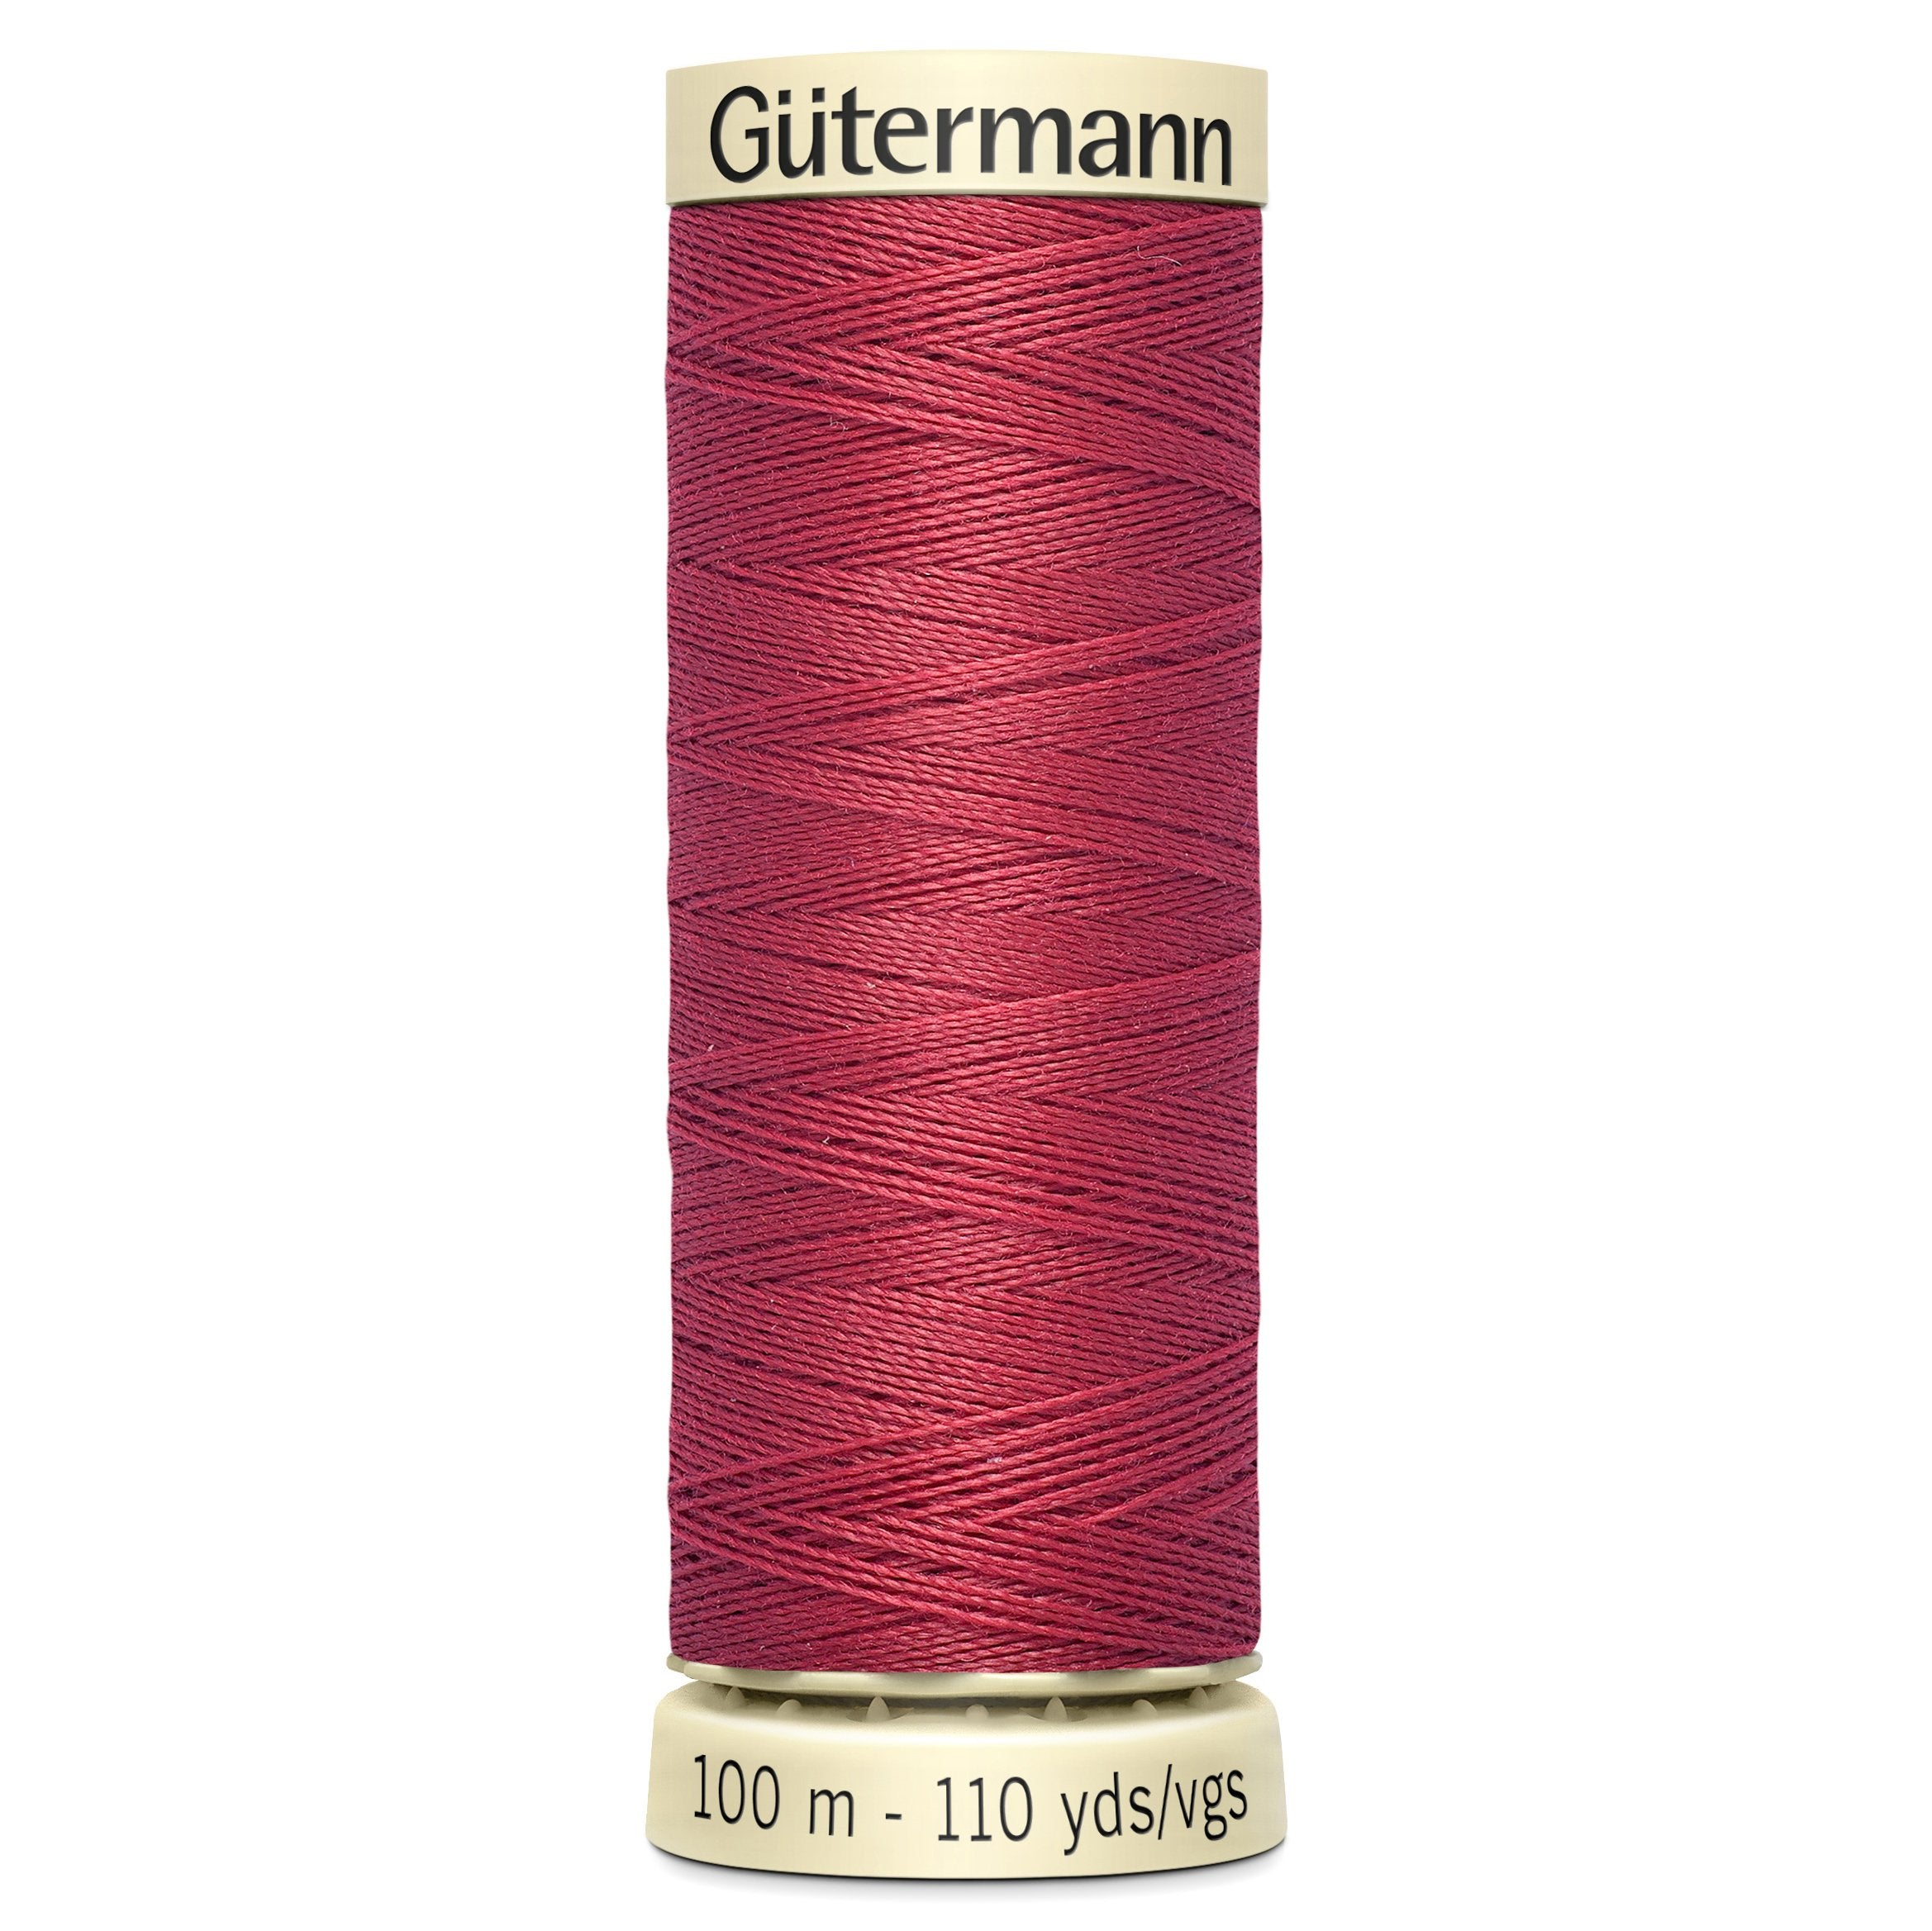 Gutermann Sew All Thread colour 82 Red from Jaycotts Sewing Supplies